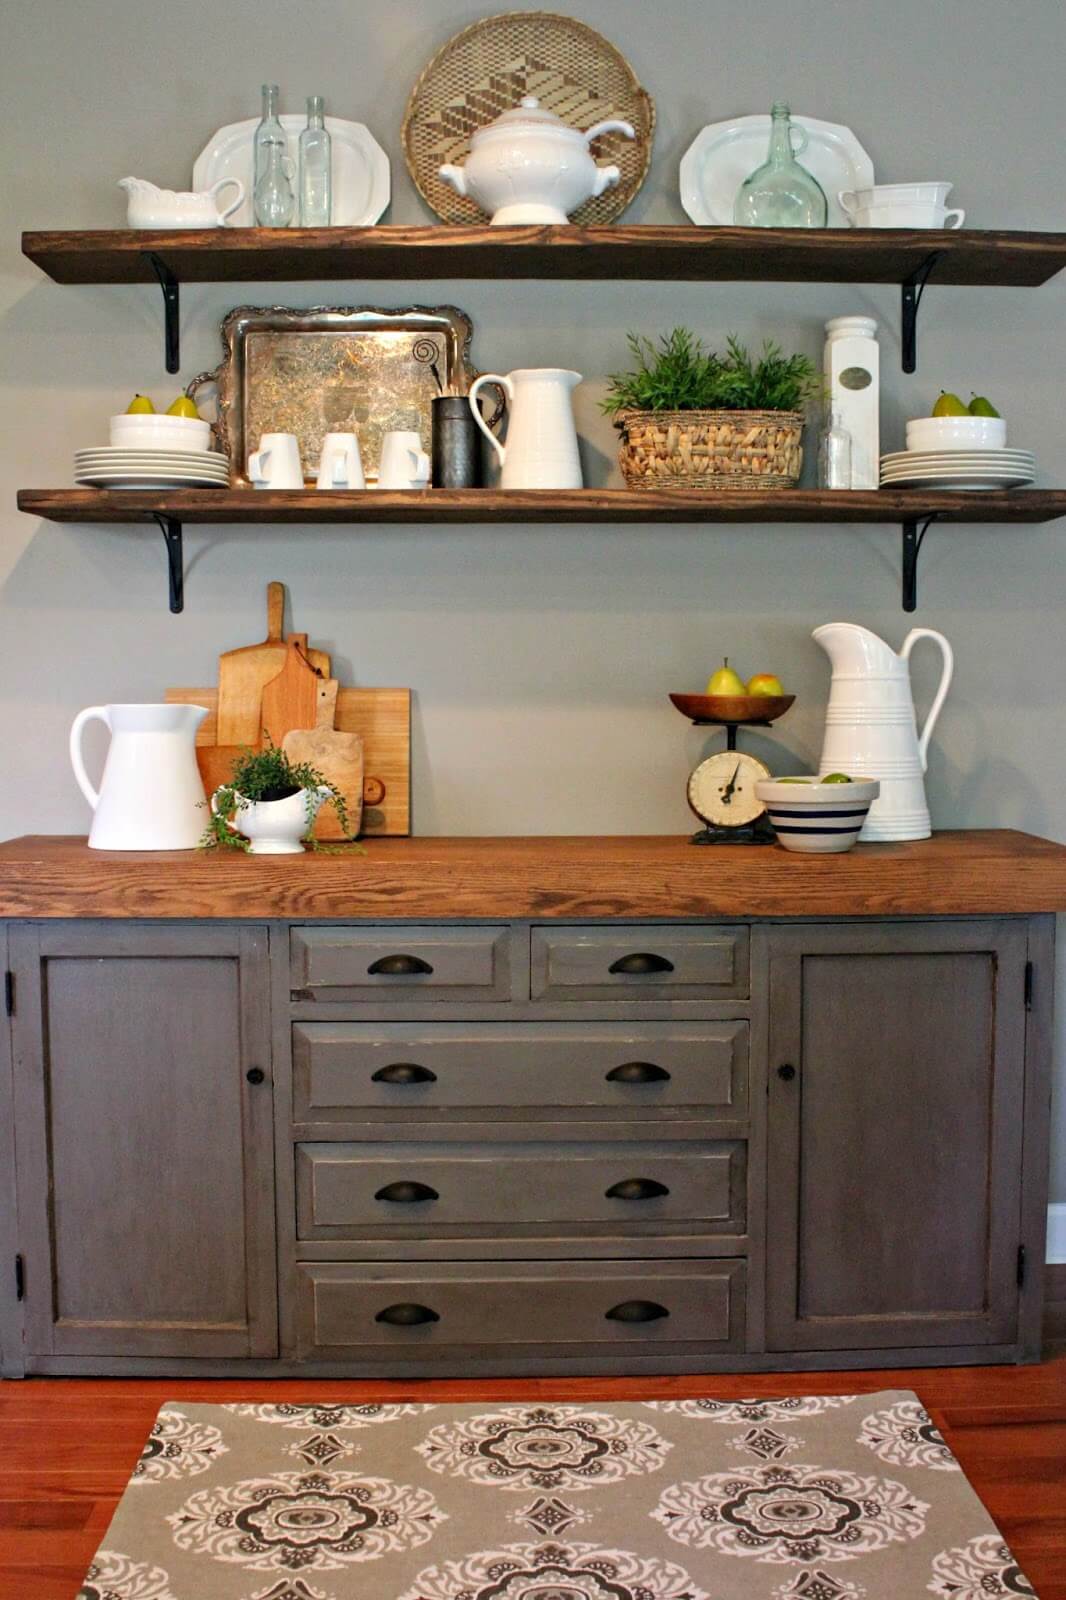 32 Best Dining Room Storage Ideas And Designs For 2021 With a few simple touches, you can quickly transform your dining room into a cozy place for dinner parties and delicious meals at home. 32 best dining room storage ideas and